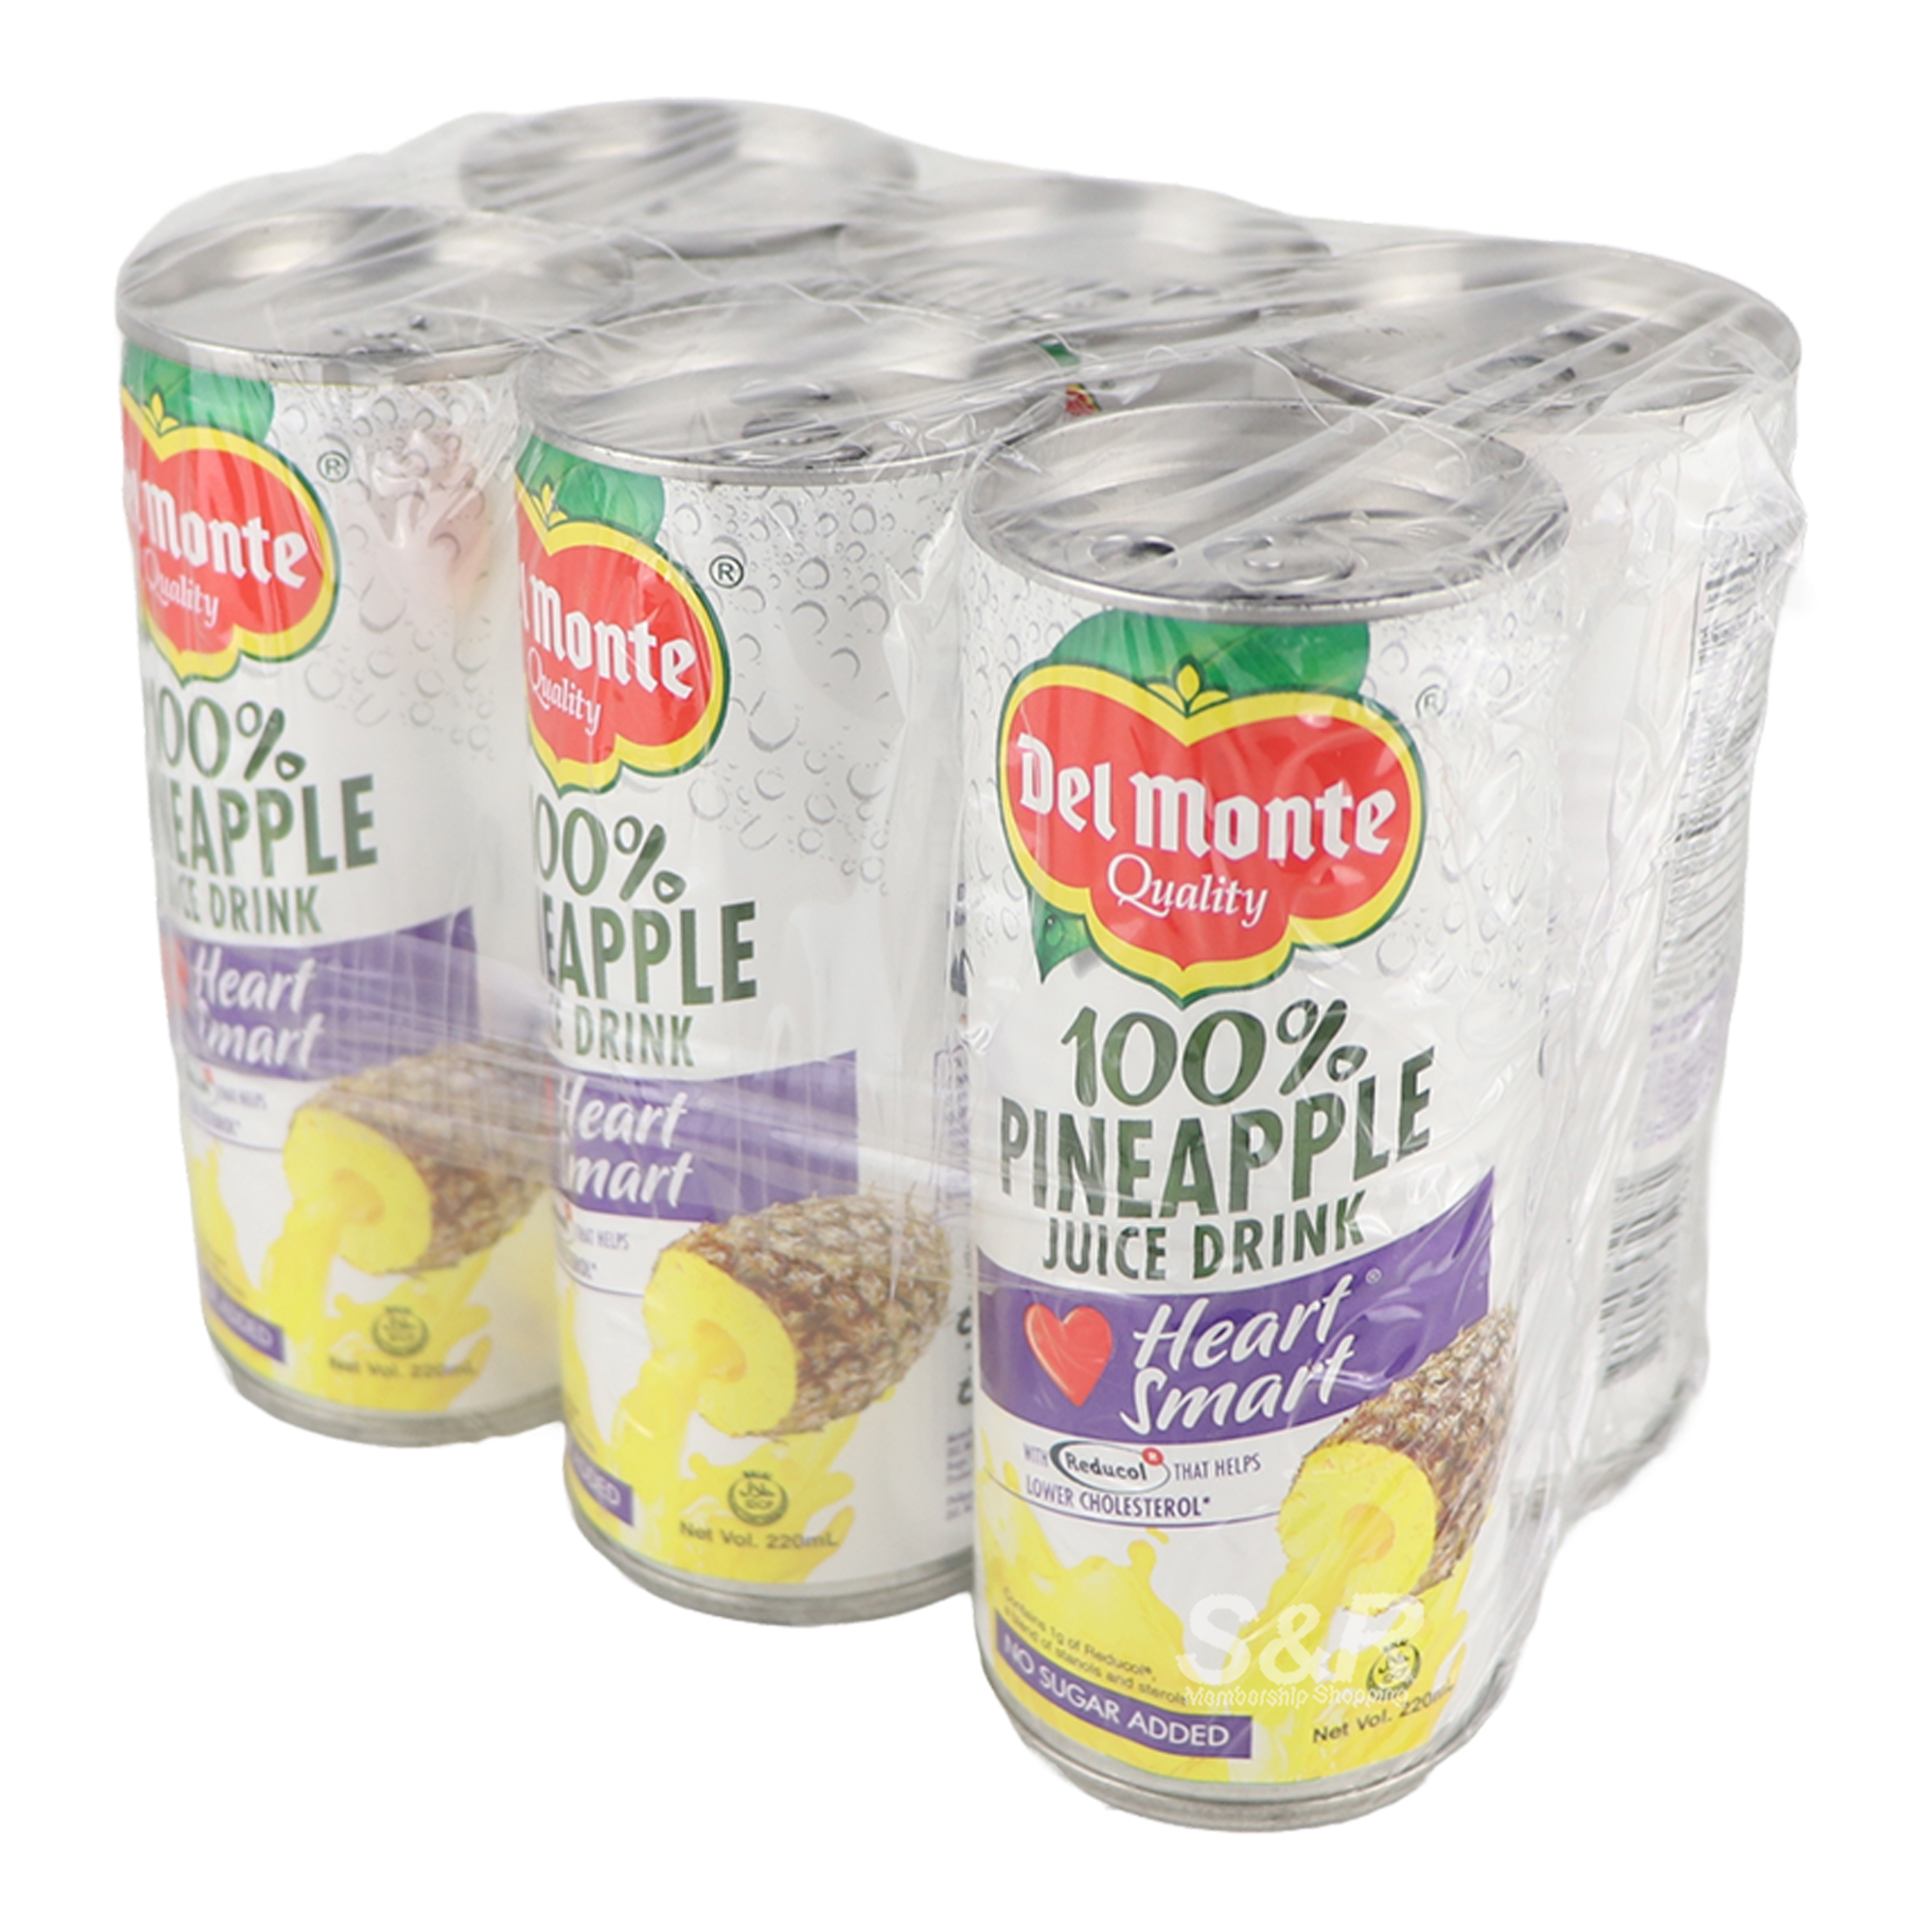 Del Monte 100% Pineapple Juice Drink 6 cans